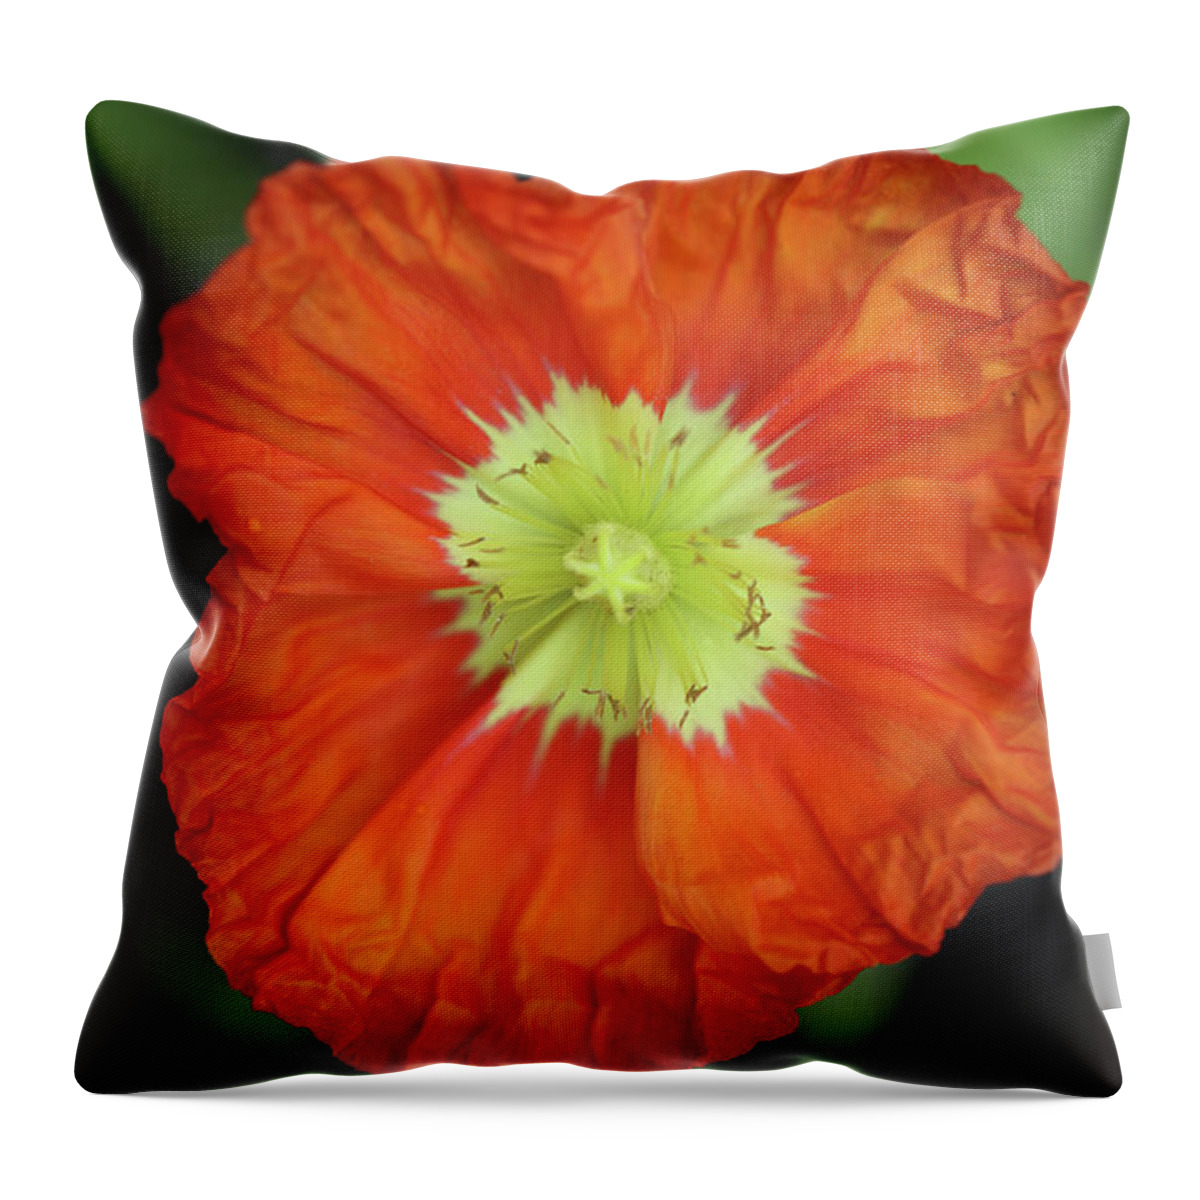 Iceland Poppy Throw Pillow featuring the photograph Iceland Poppy by Tammy Pool